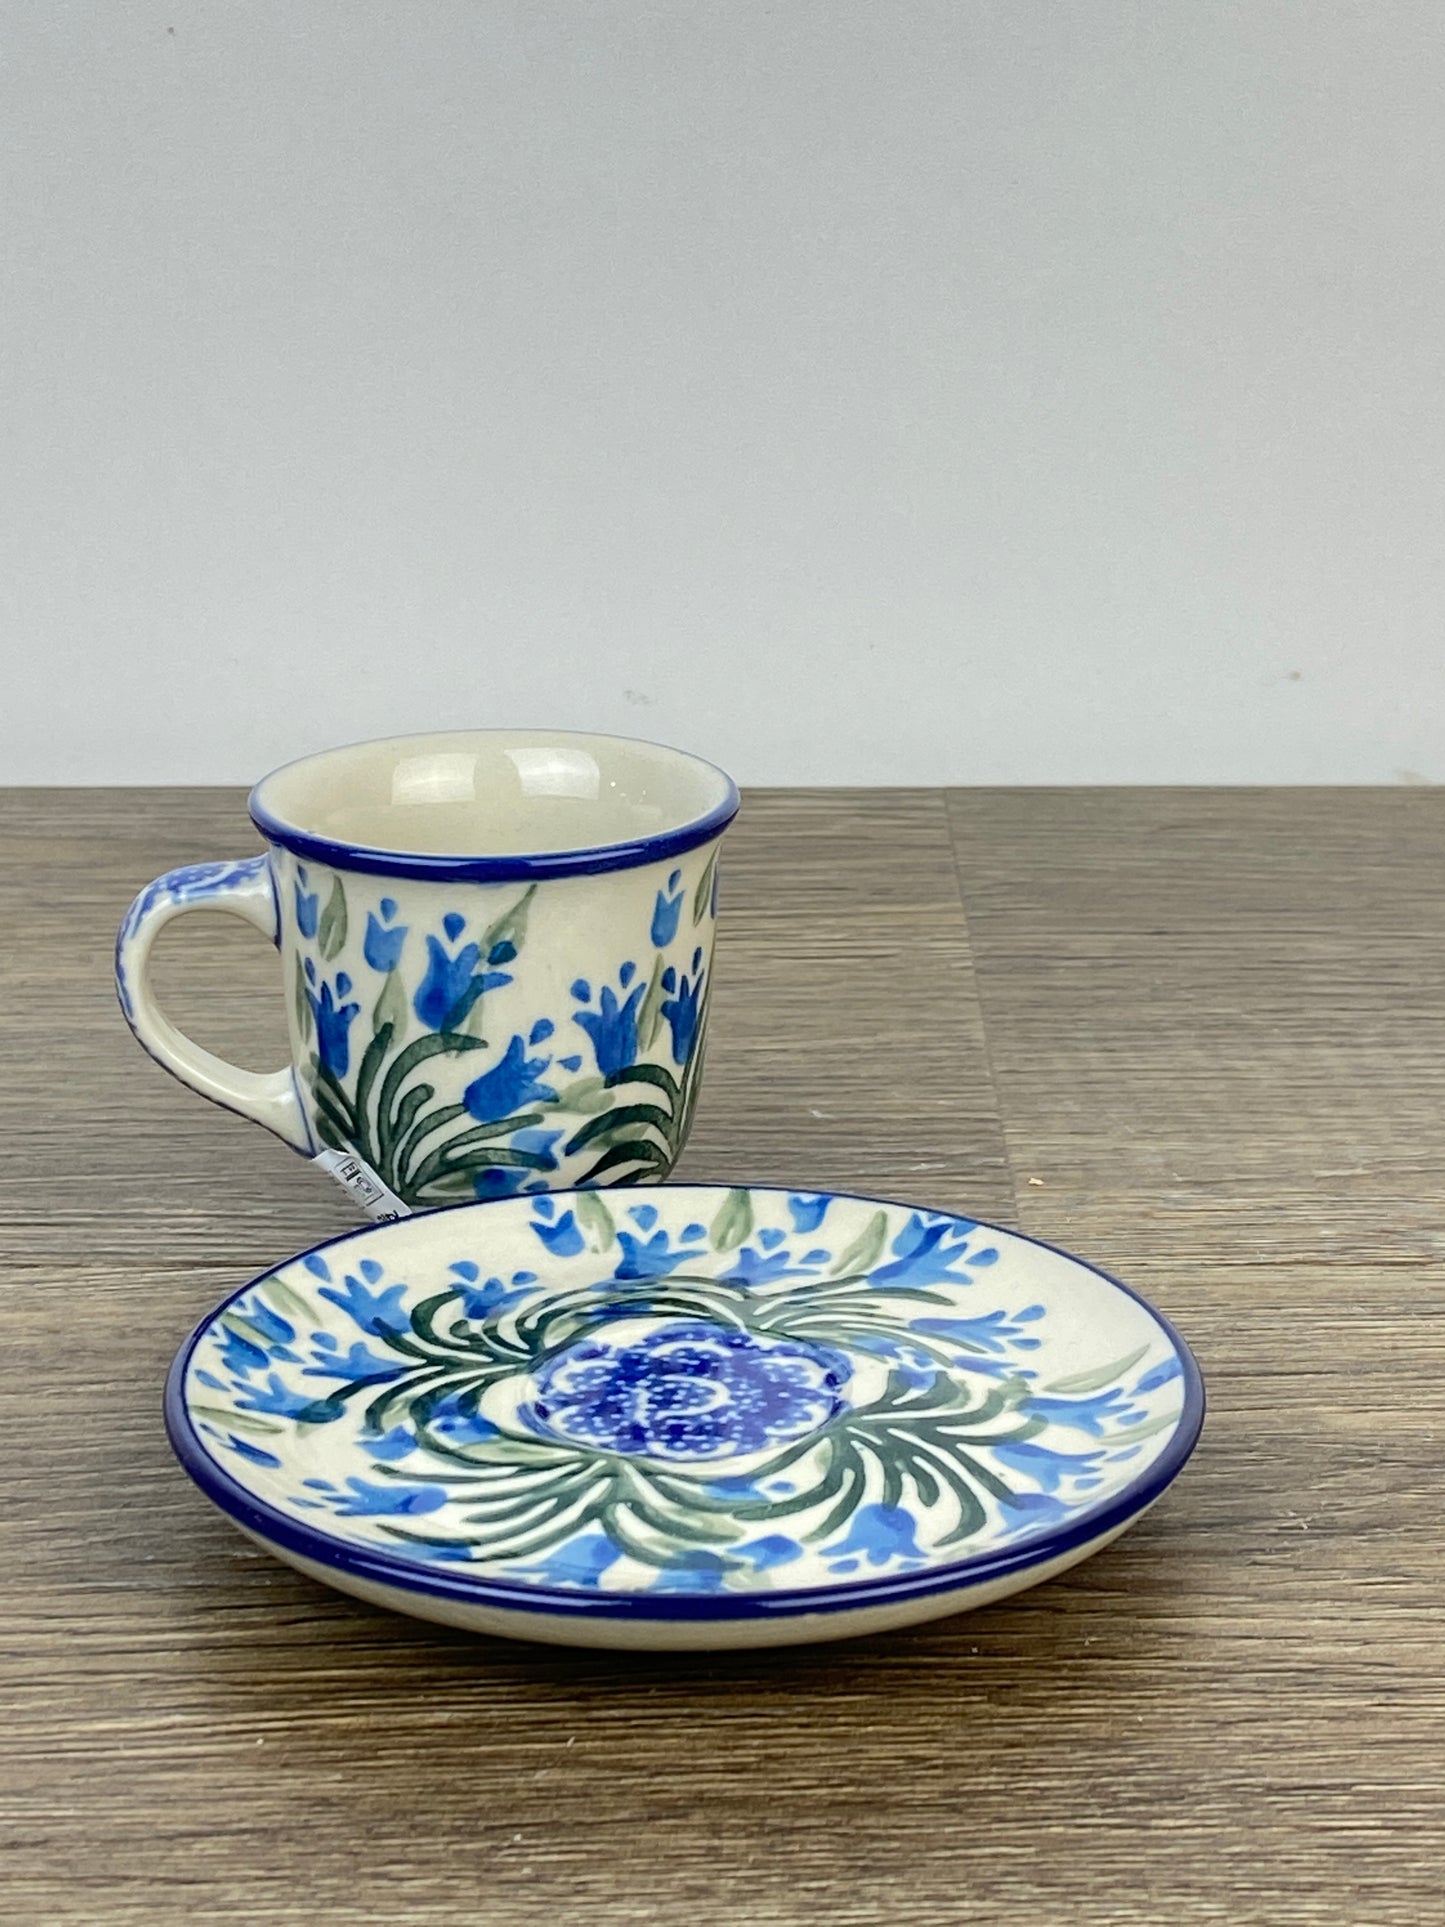 Espresso Cup and Saucer - Shape B10 - Pattern 1432